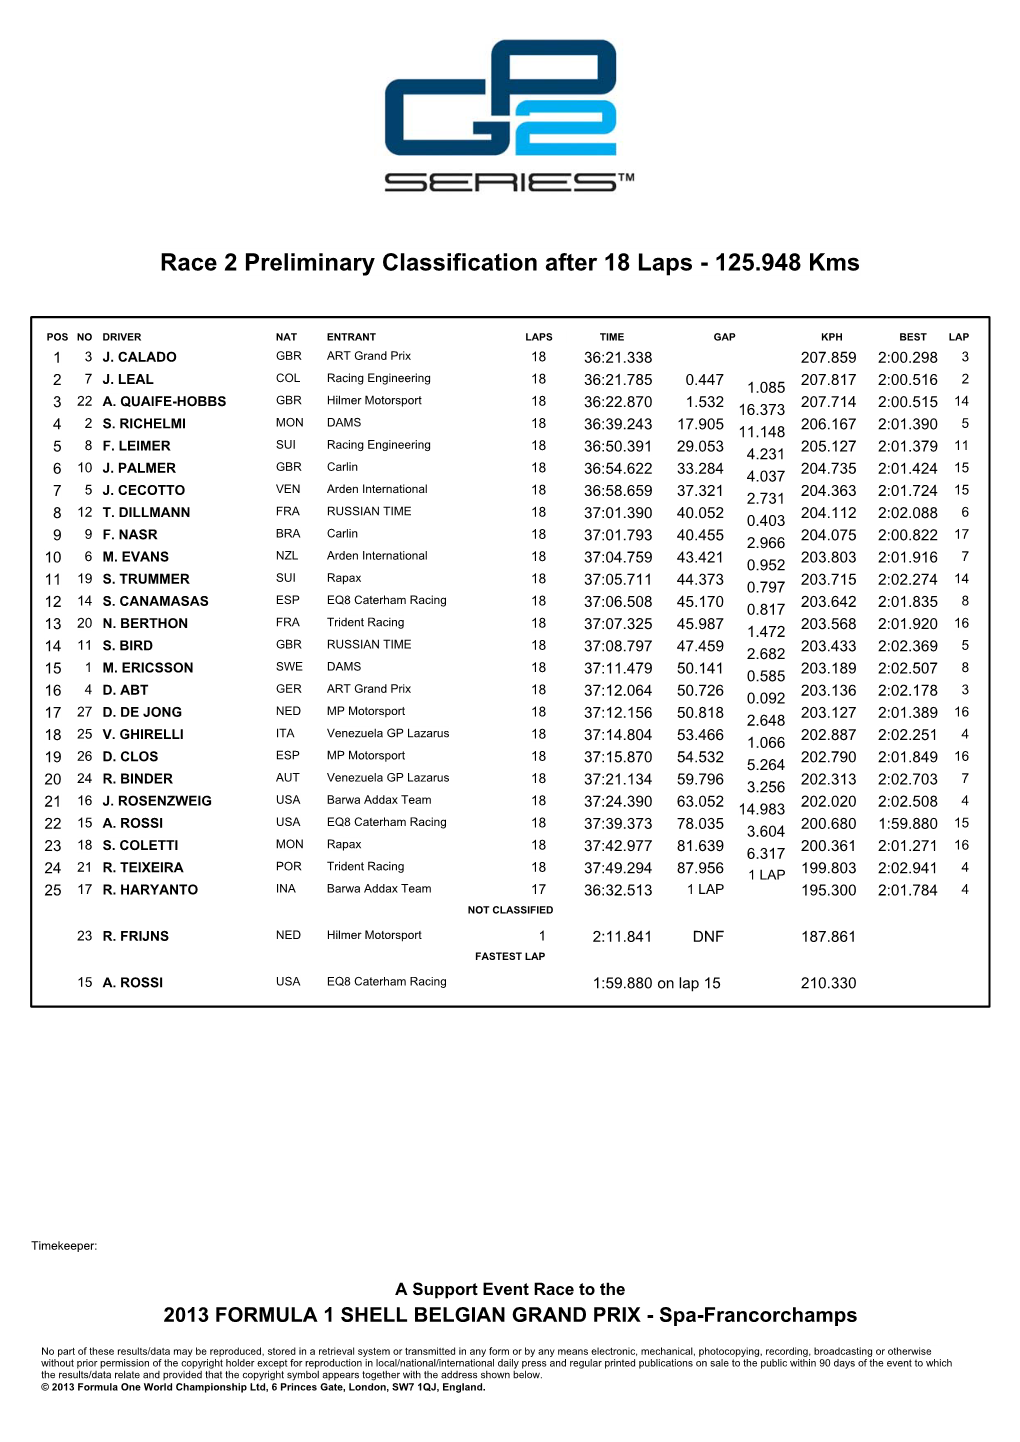 Race 2 Preliminary Classification After 18 Laps - 125.948 Kms